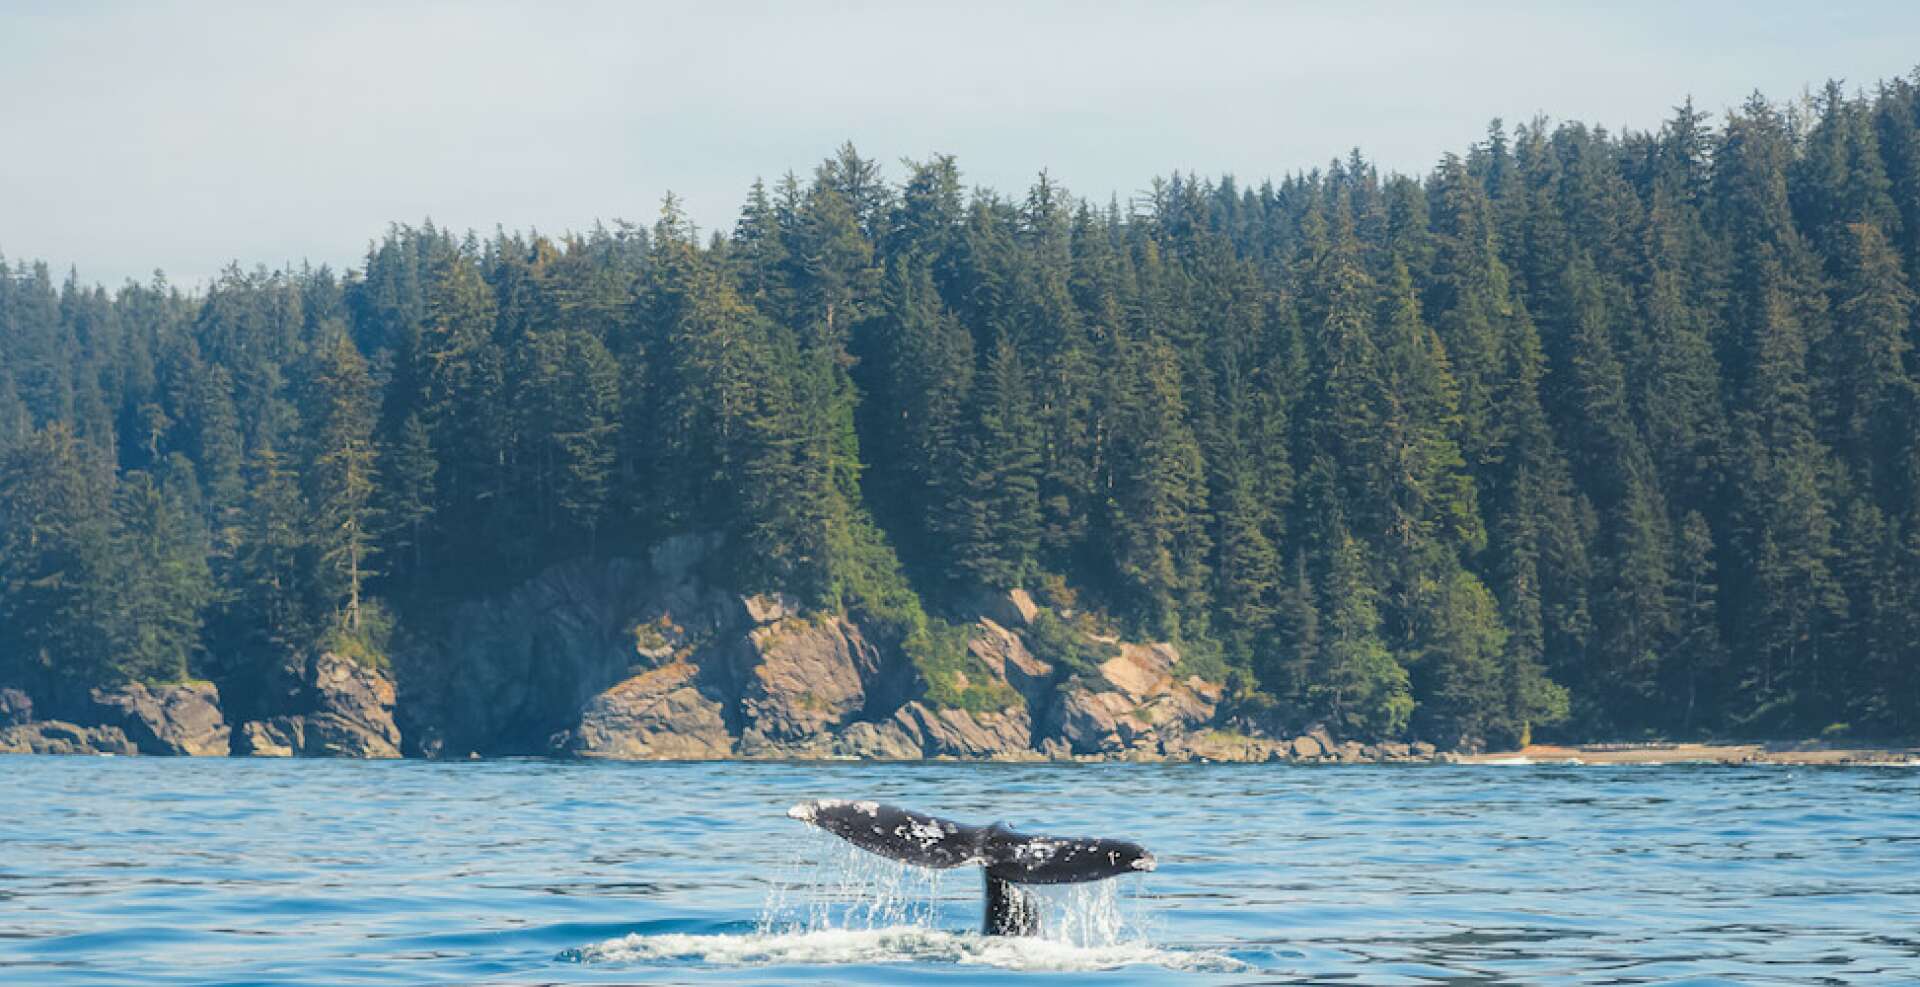 Tofino Whale Watching Guide